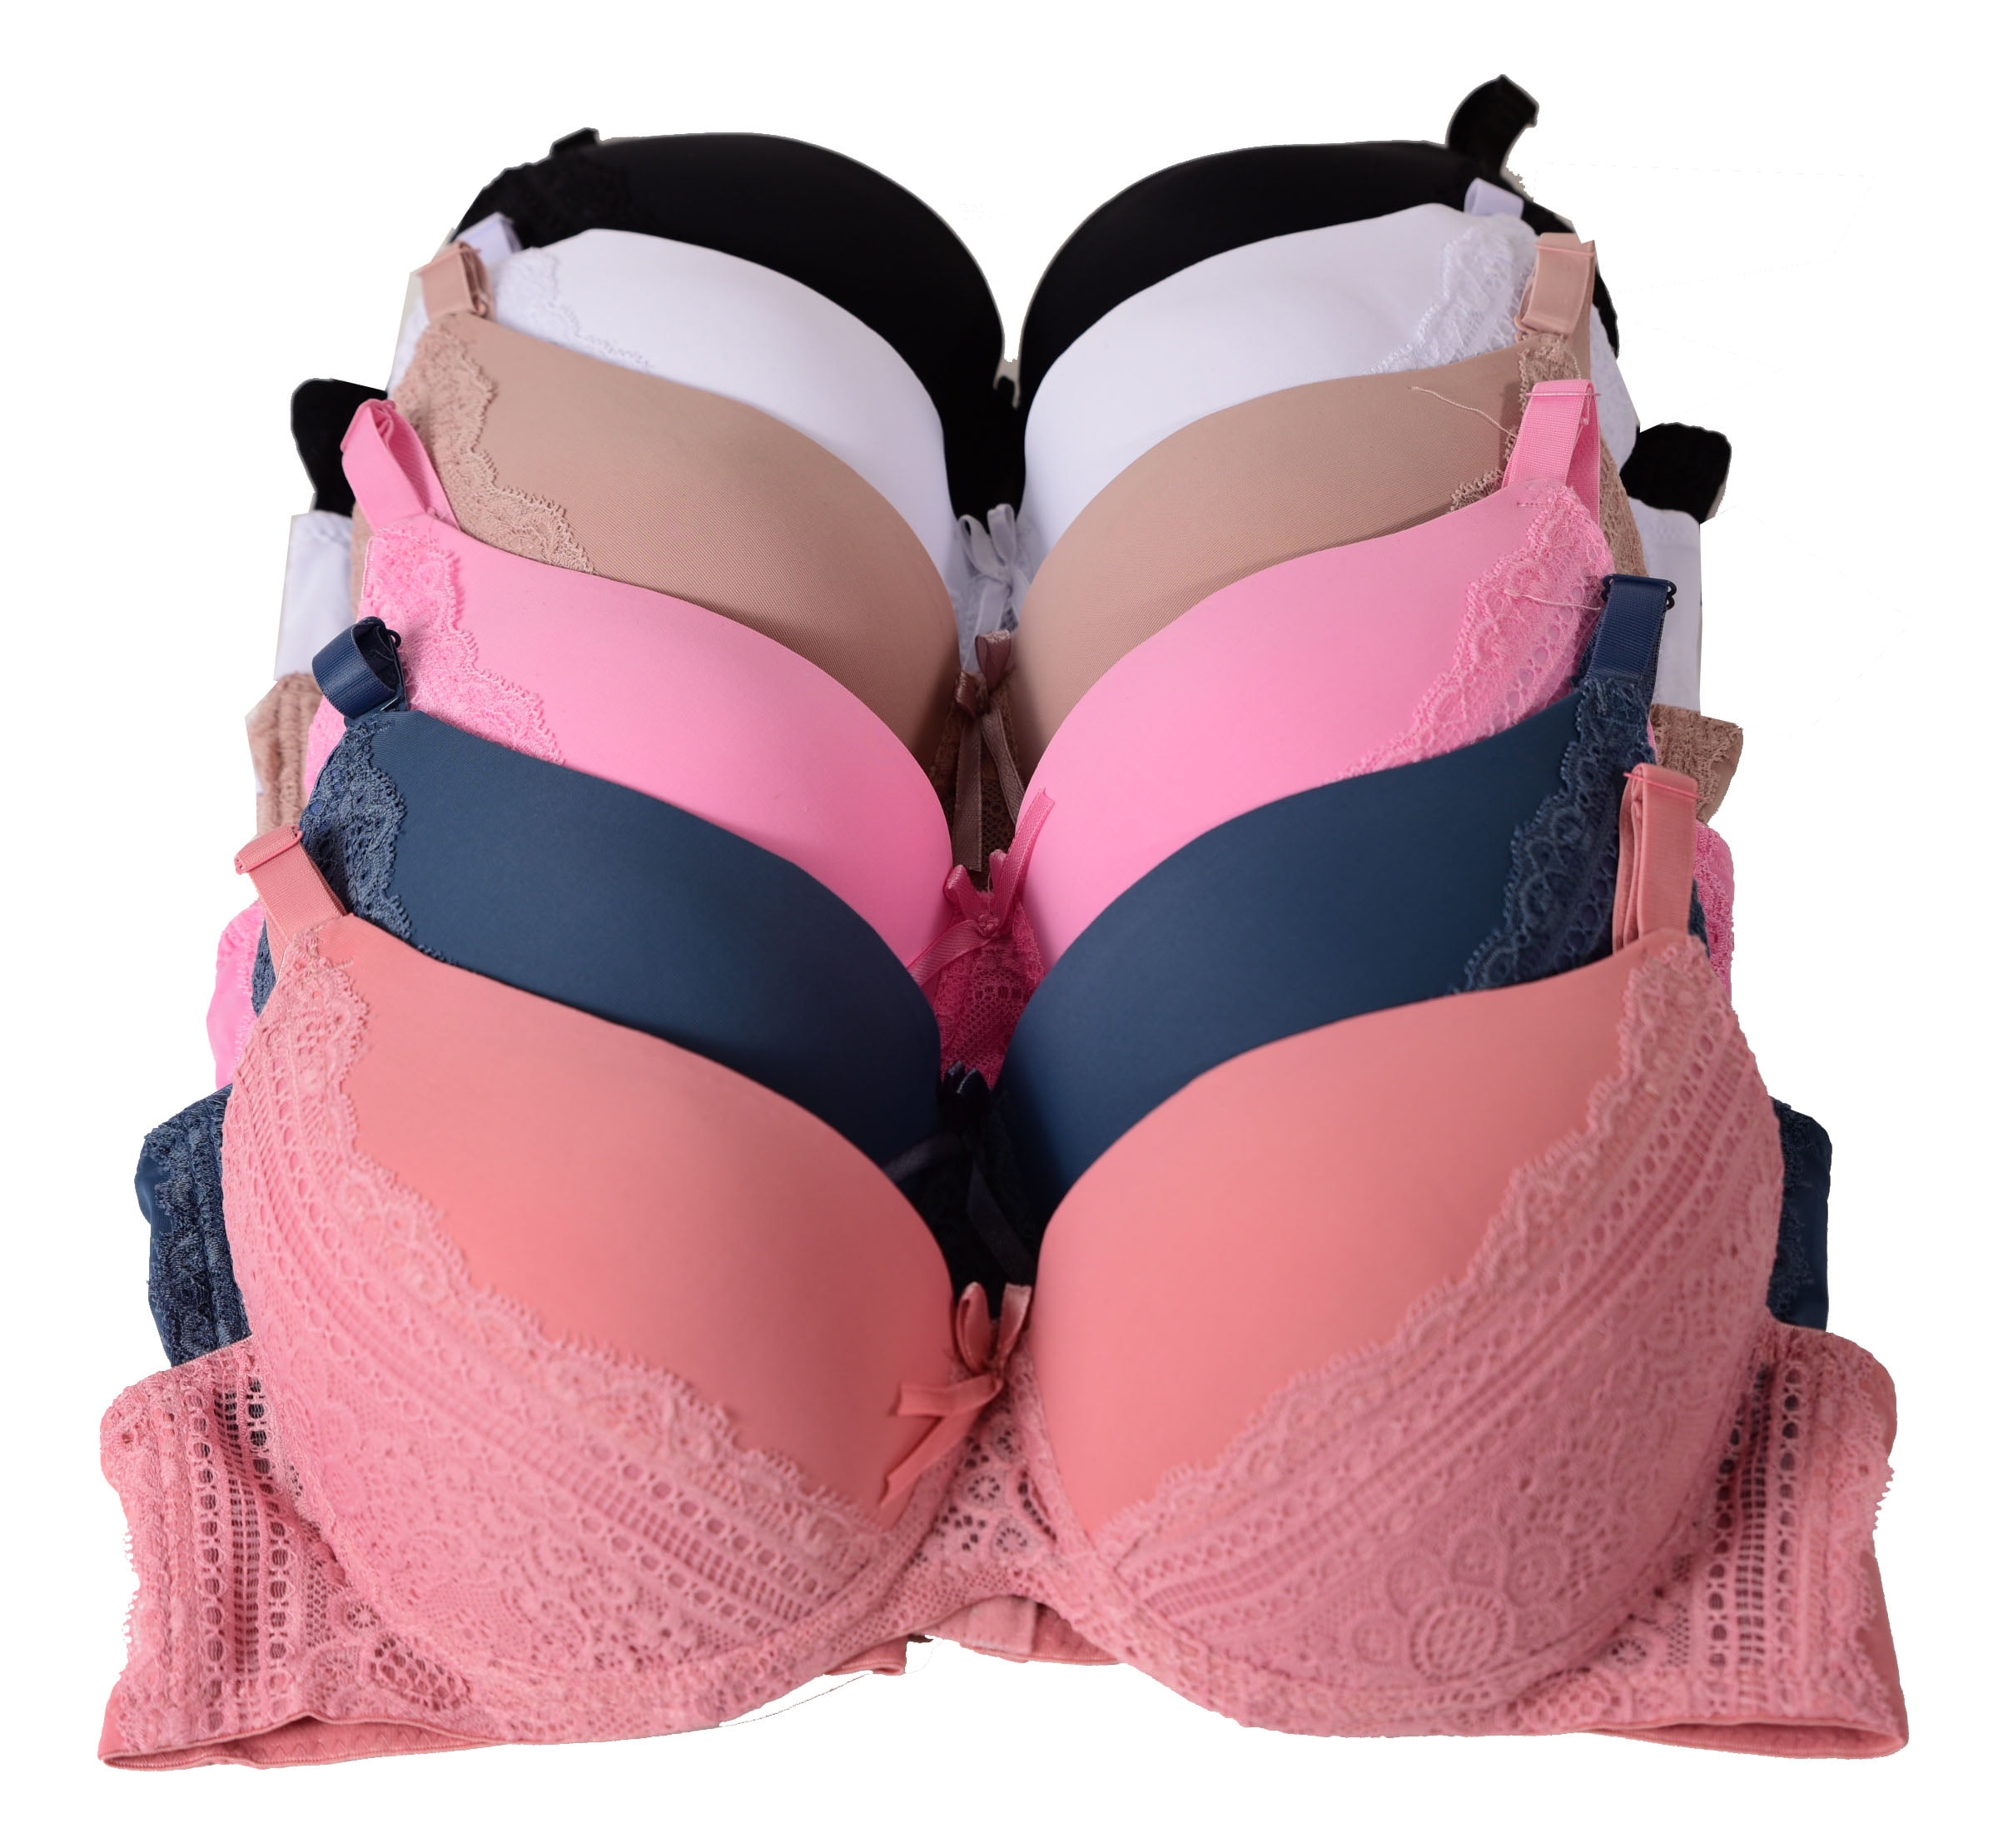 Women Bras 6 pack of Pushup Bra B cup C cup D cup DD cup Size 34B (S6670) 